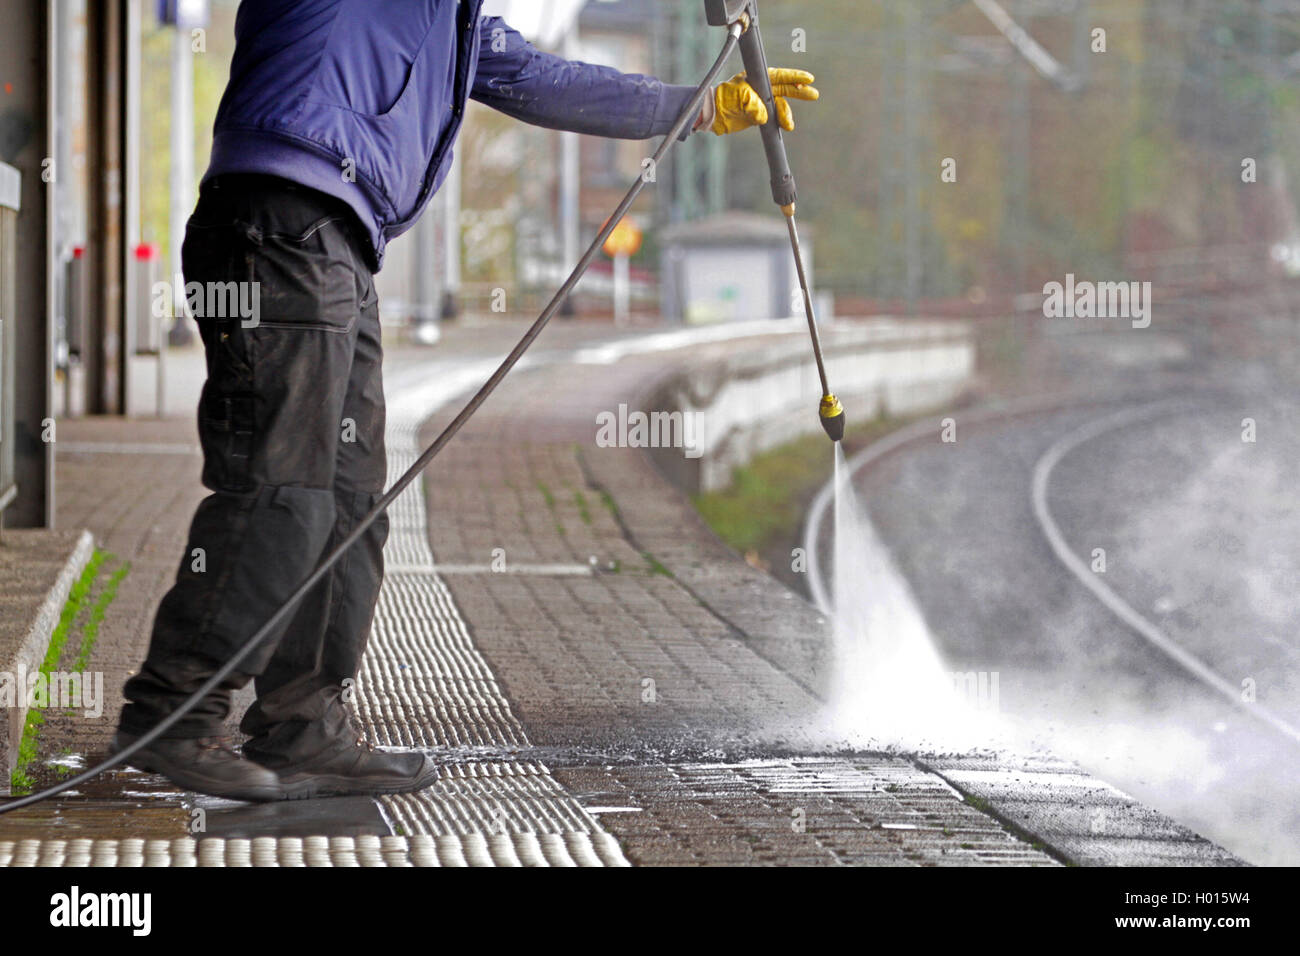 cleaning ways with pressure washer, Germany Stock Photo